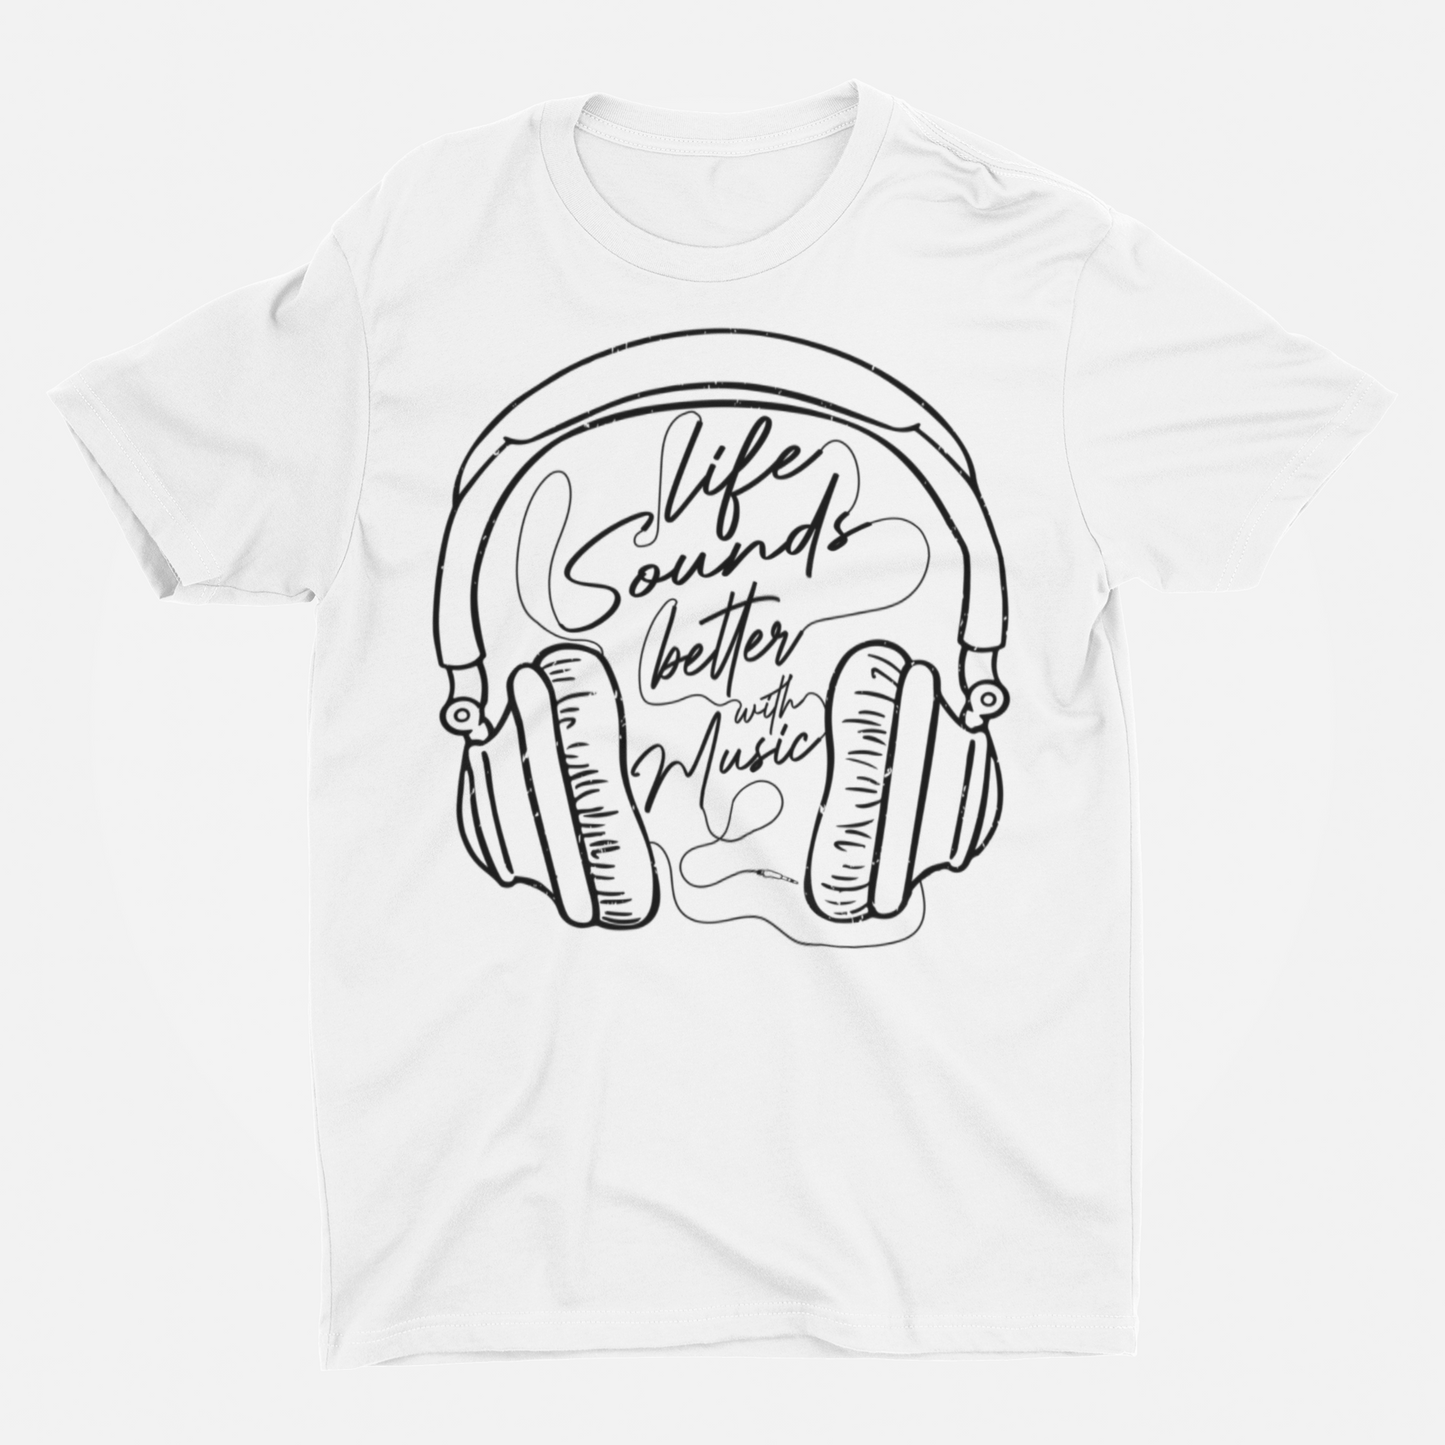 Life Sounds Better With Music White Round Neck T-Shirt for Men